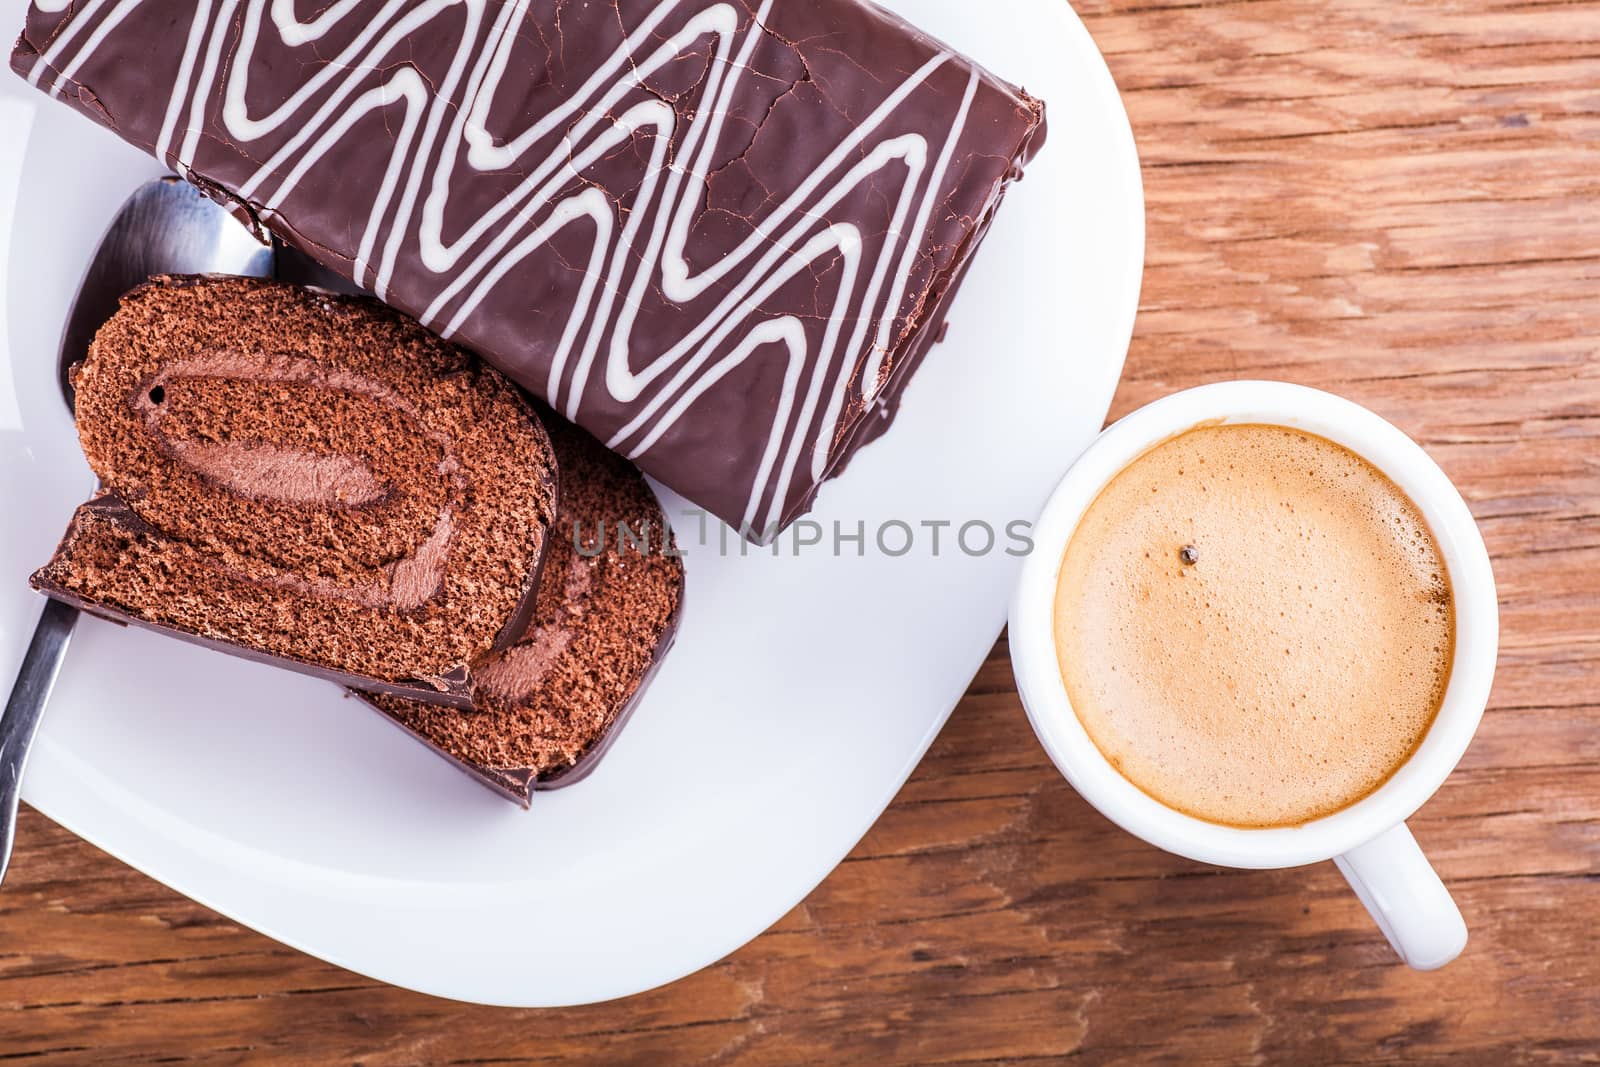 sweet roll with a cup of coffee close-up on a wooden background